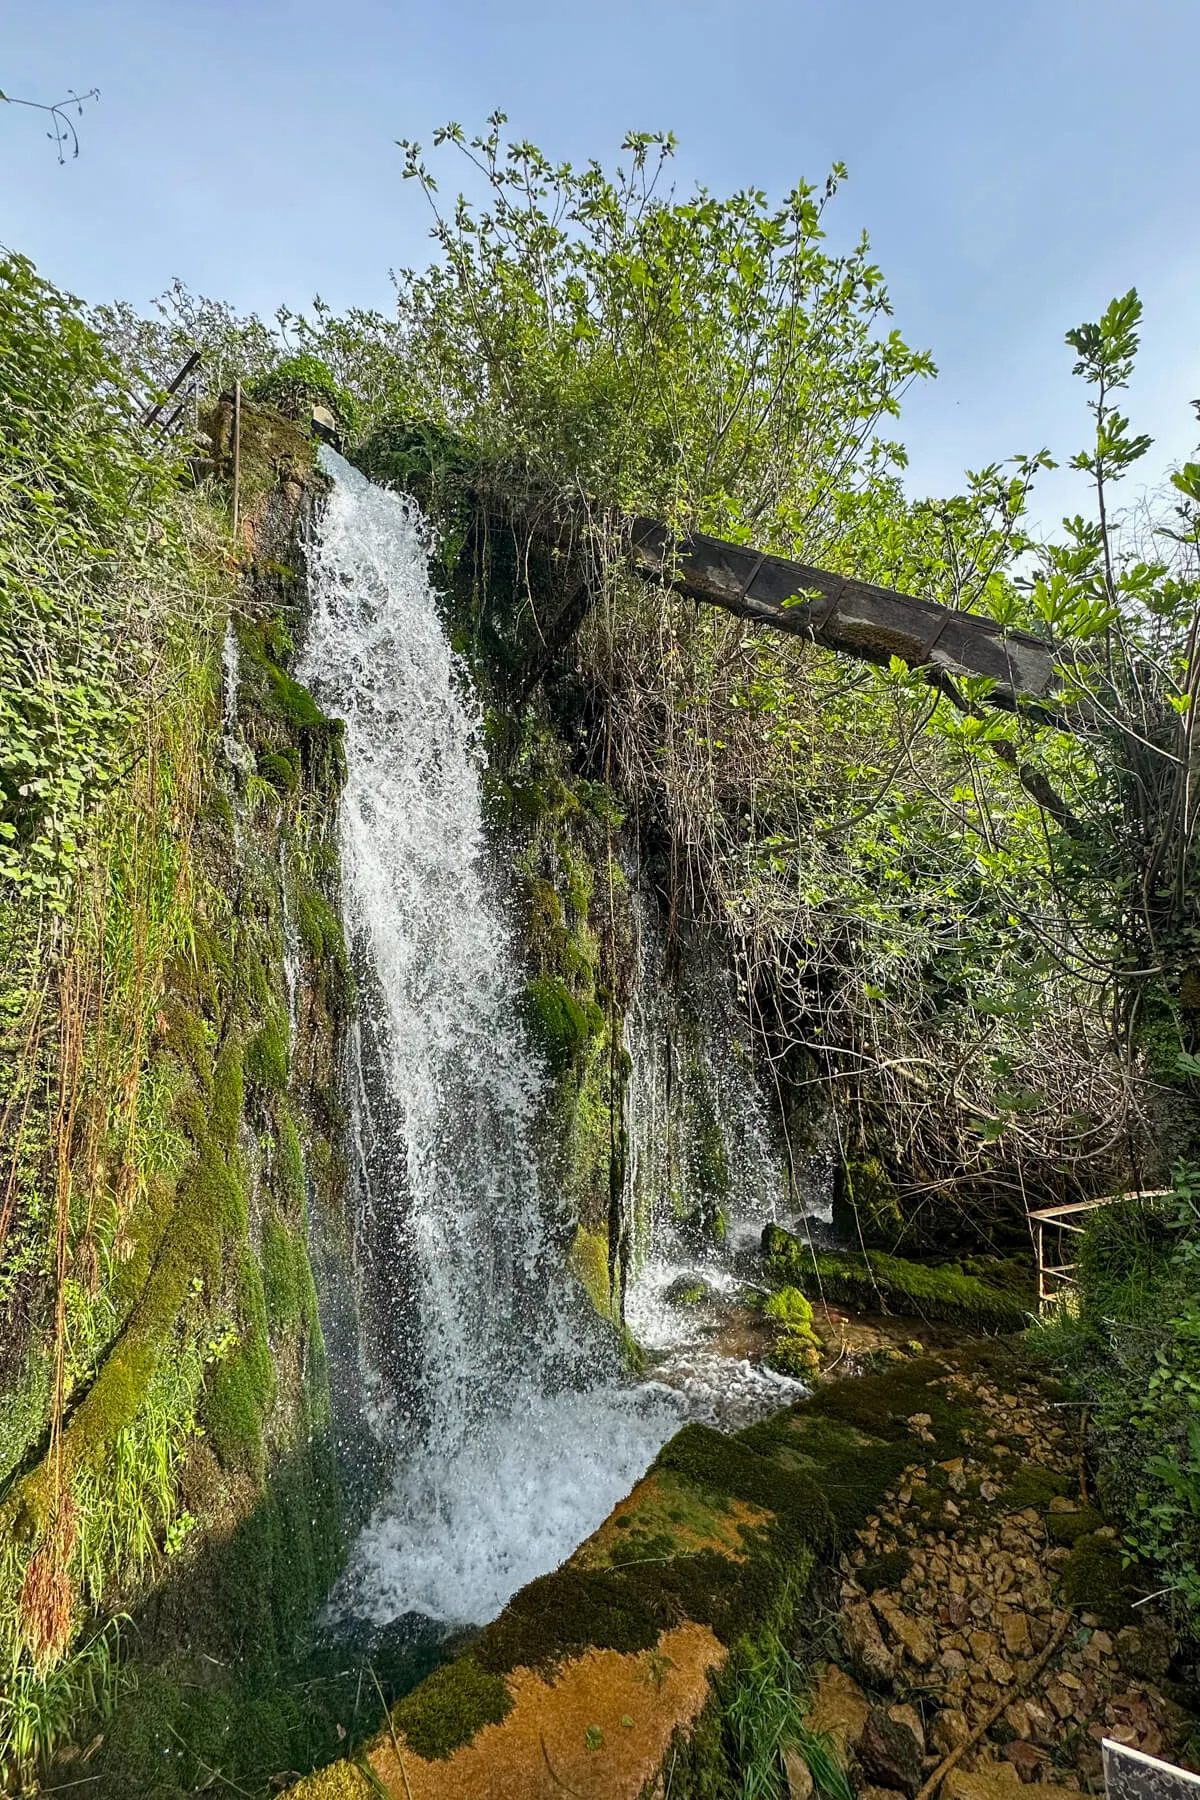 A waterfall at the Open Air Water Power Museum in Stemnitsa, Greece